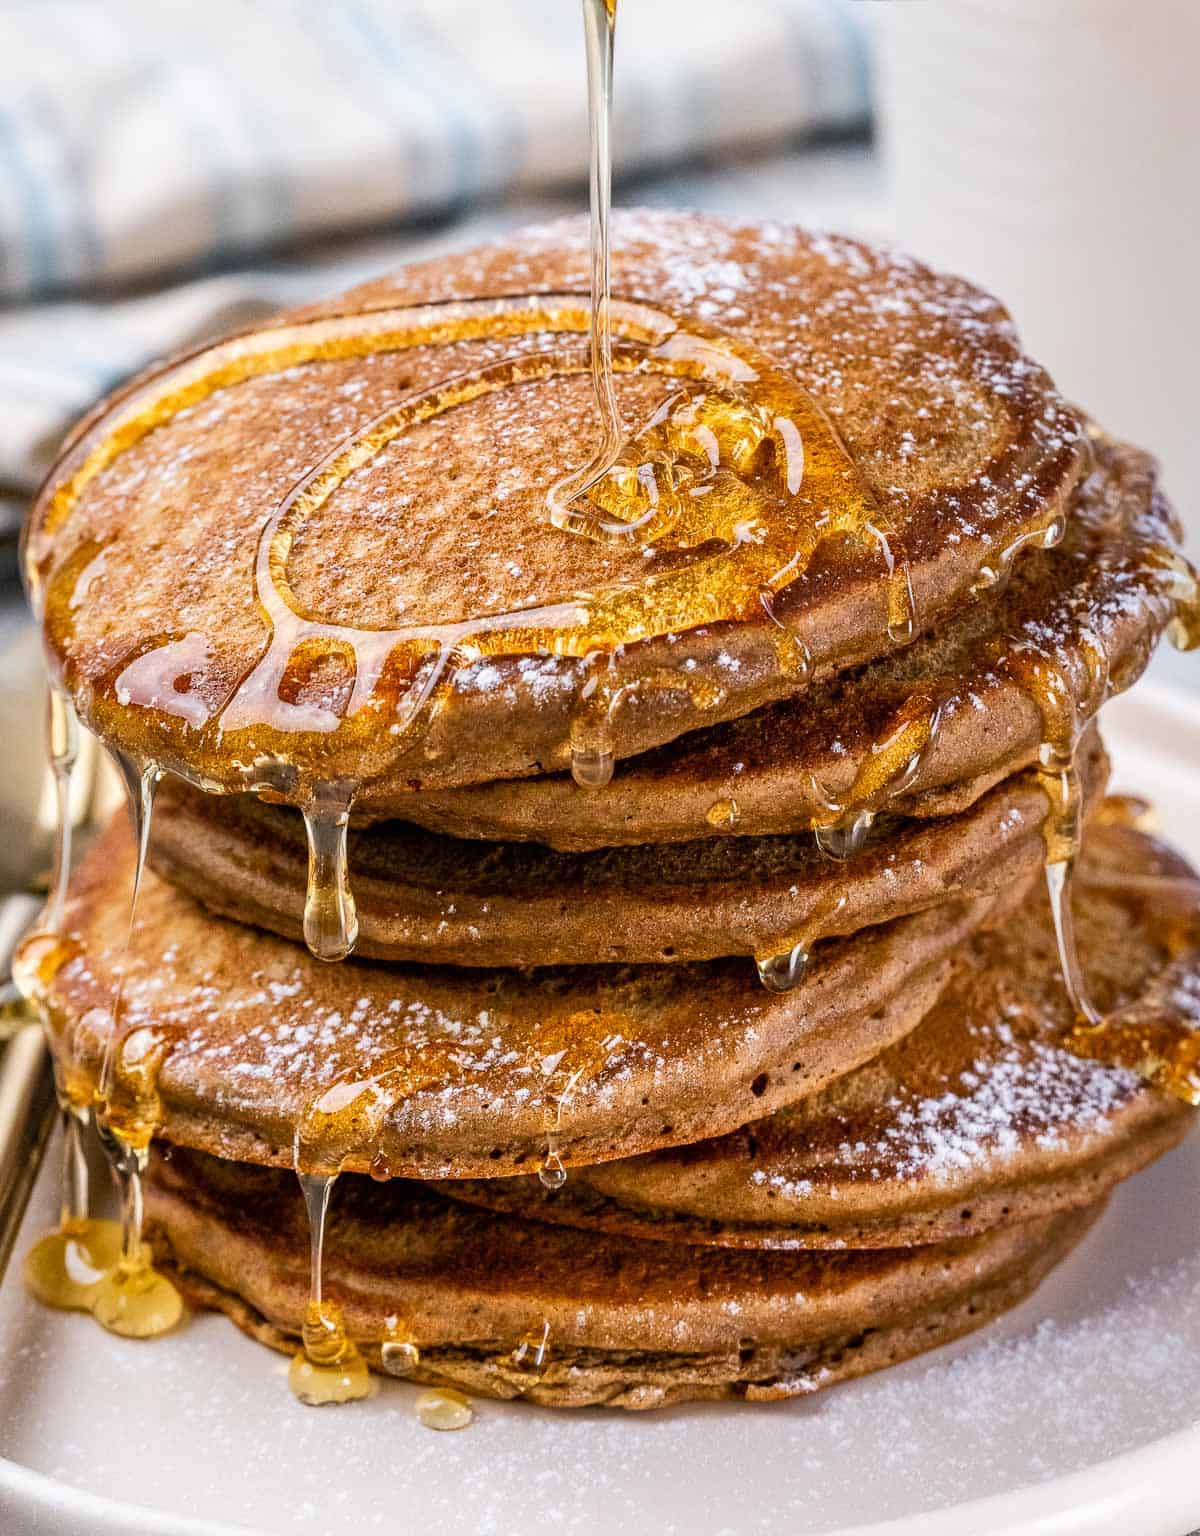 Closeup view of a stack of pancakes drizzled in maple syrup.